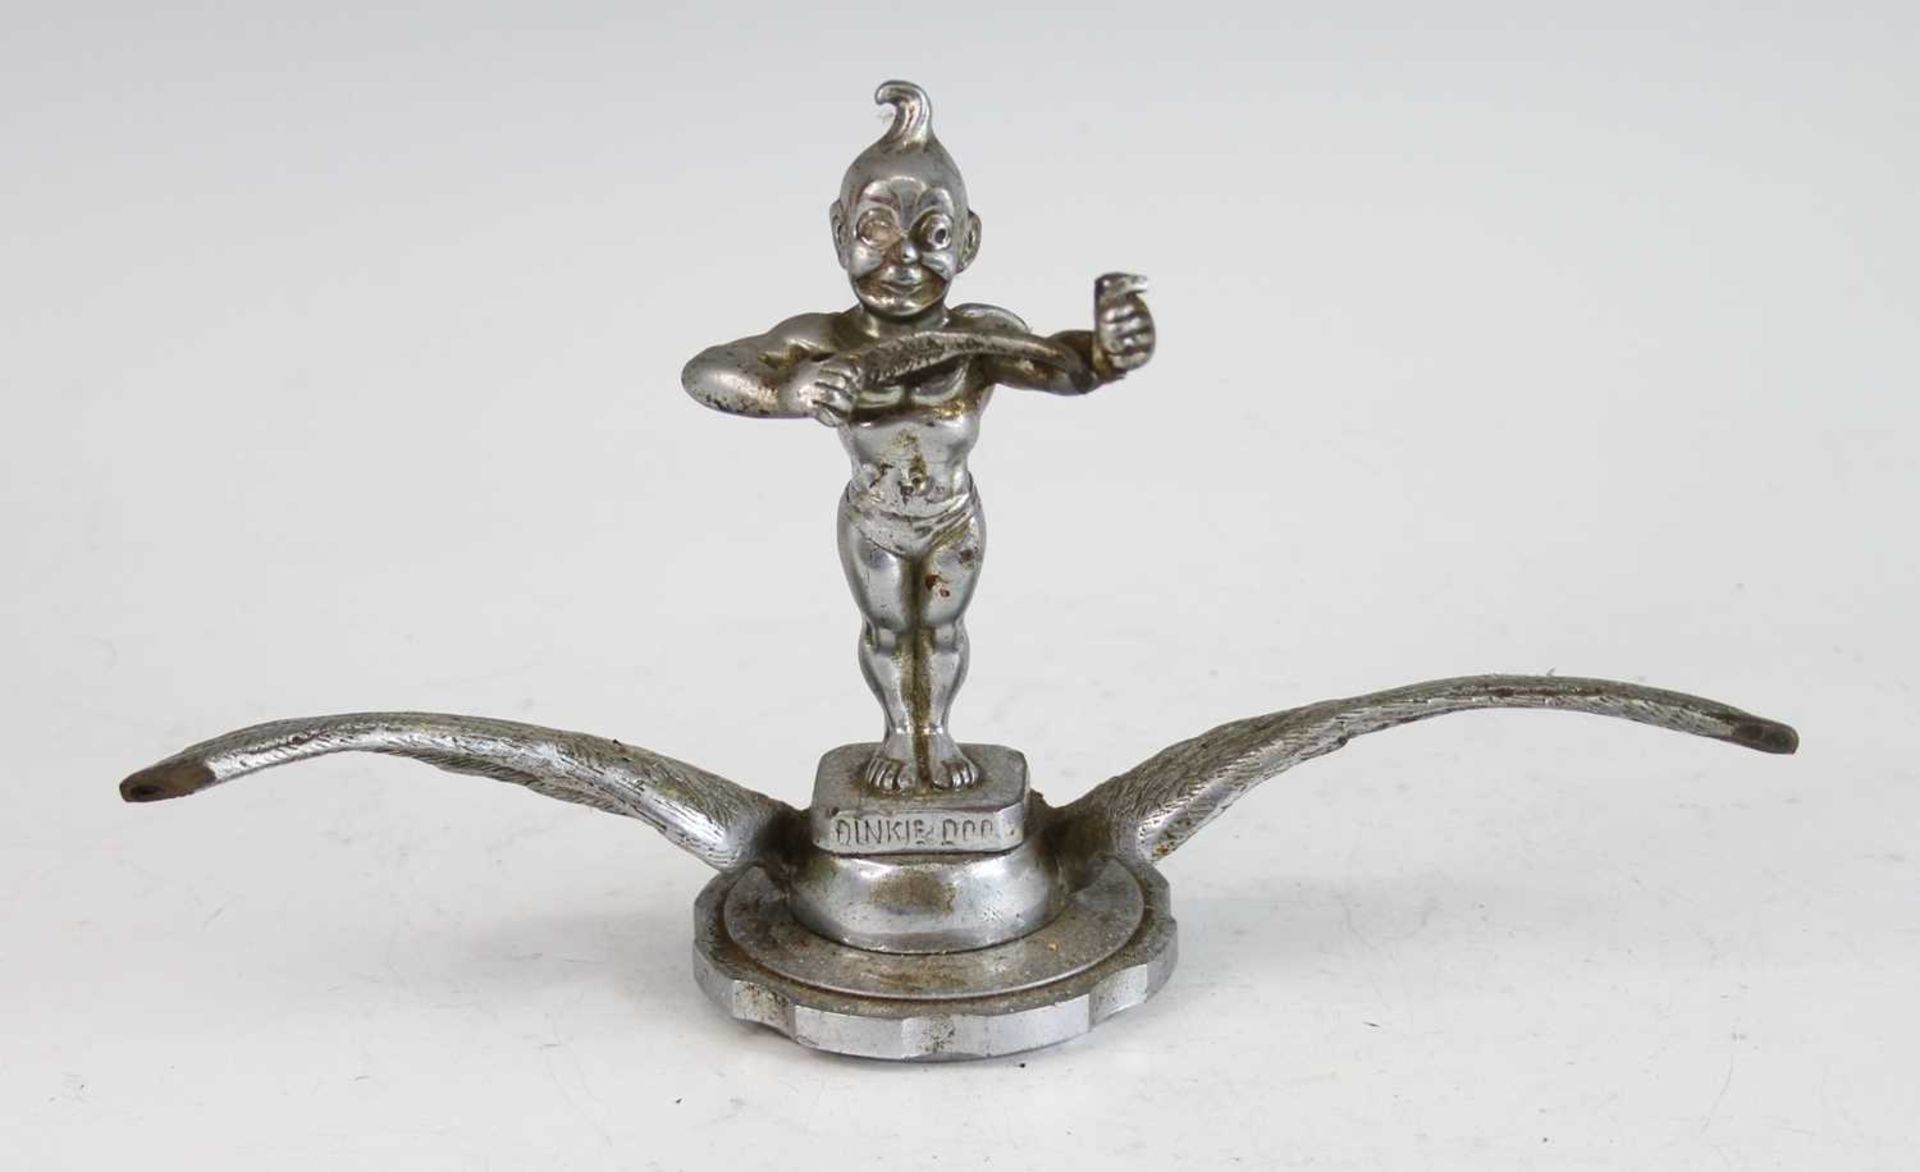 A vintage cast chromed metal car mascot of Dinky Doo, raised on winged and notched circular base,